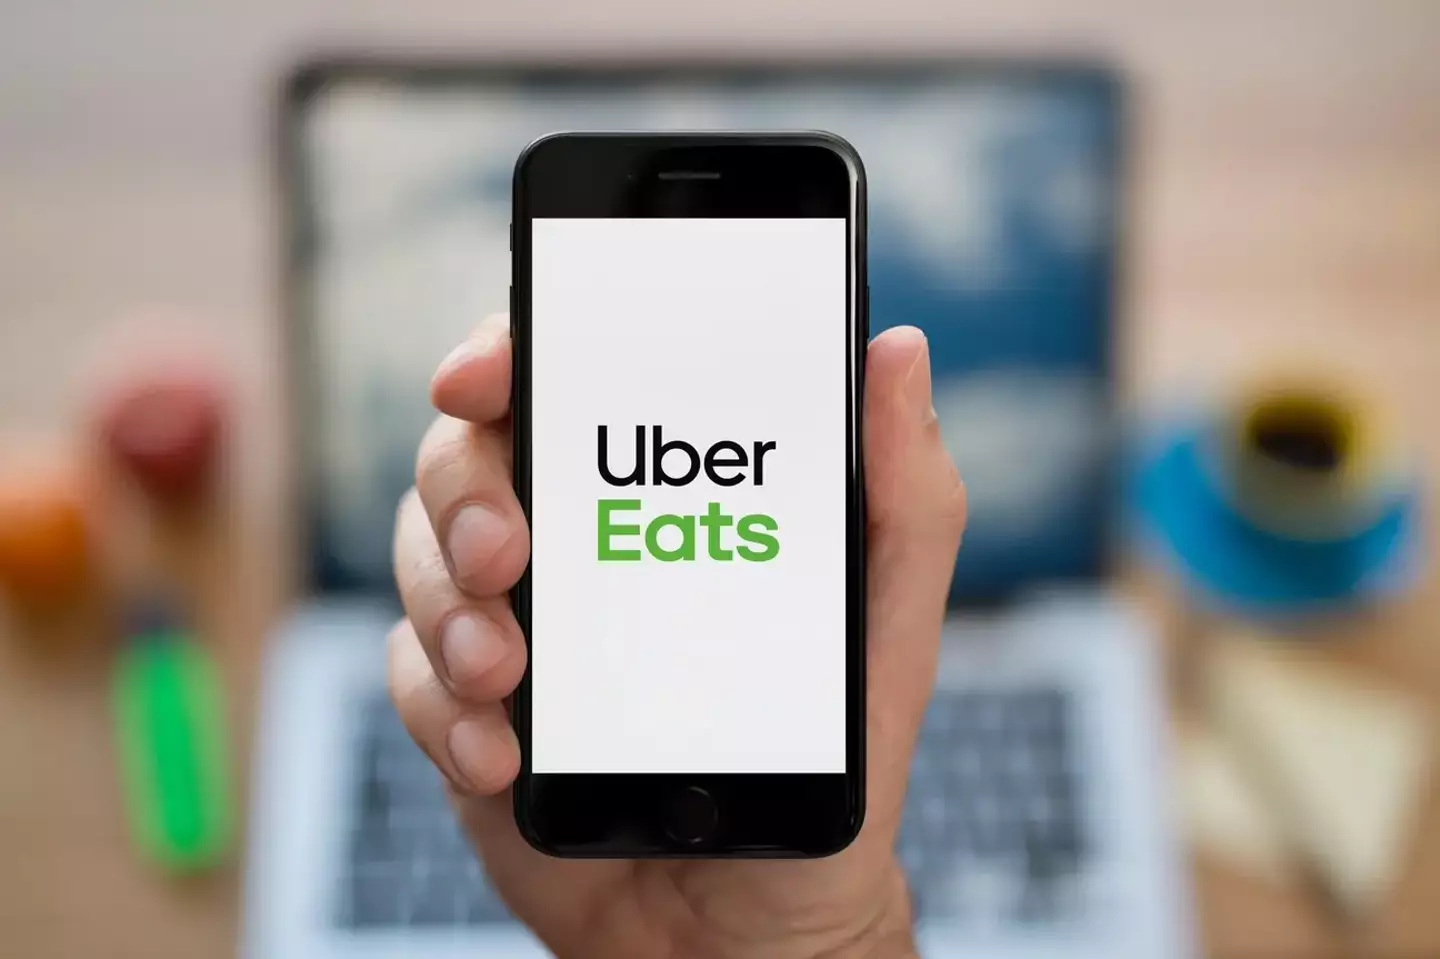 Toronto residents can now order weed through Uber Eats.